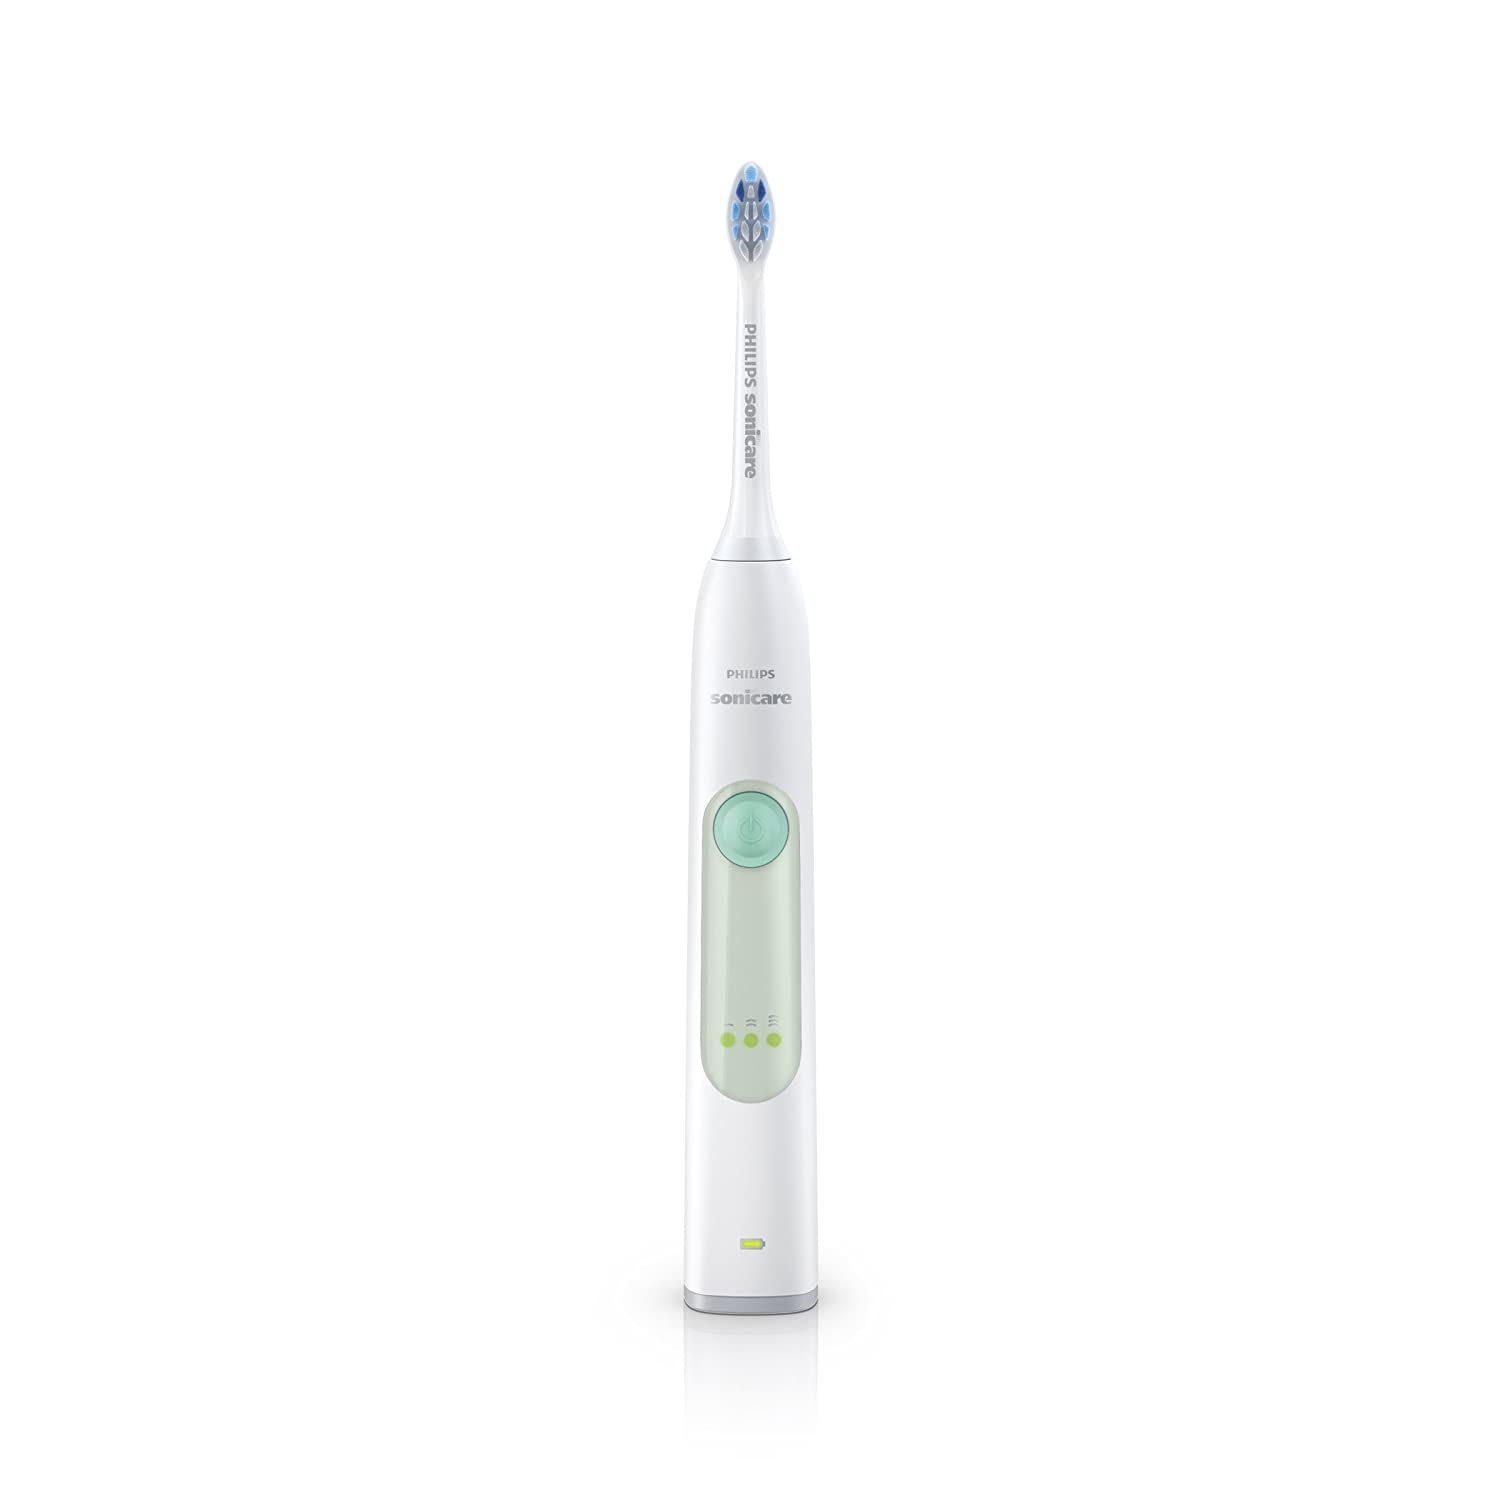 philips-sonicare-electric-toothbrush